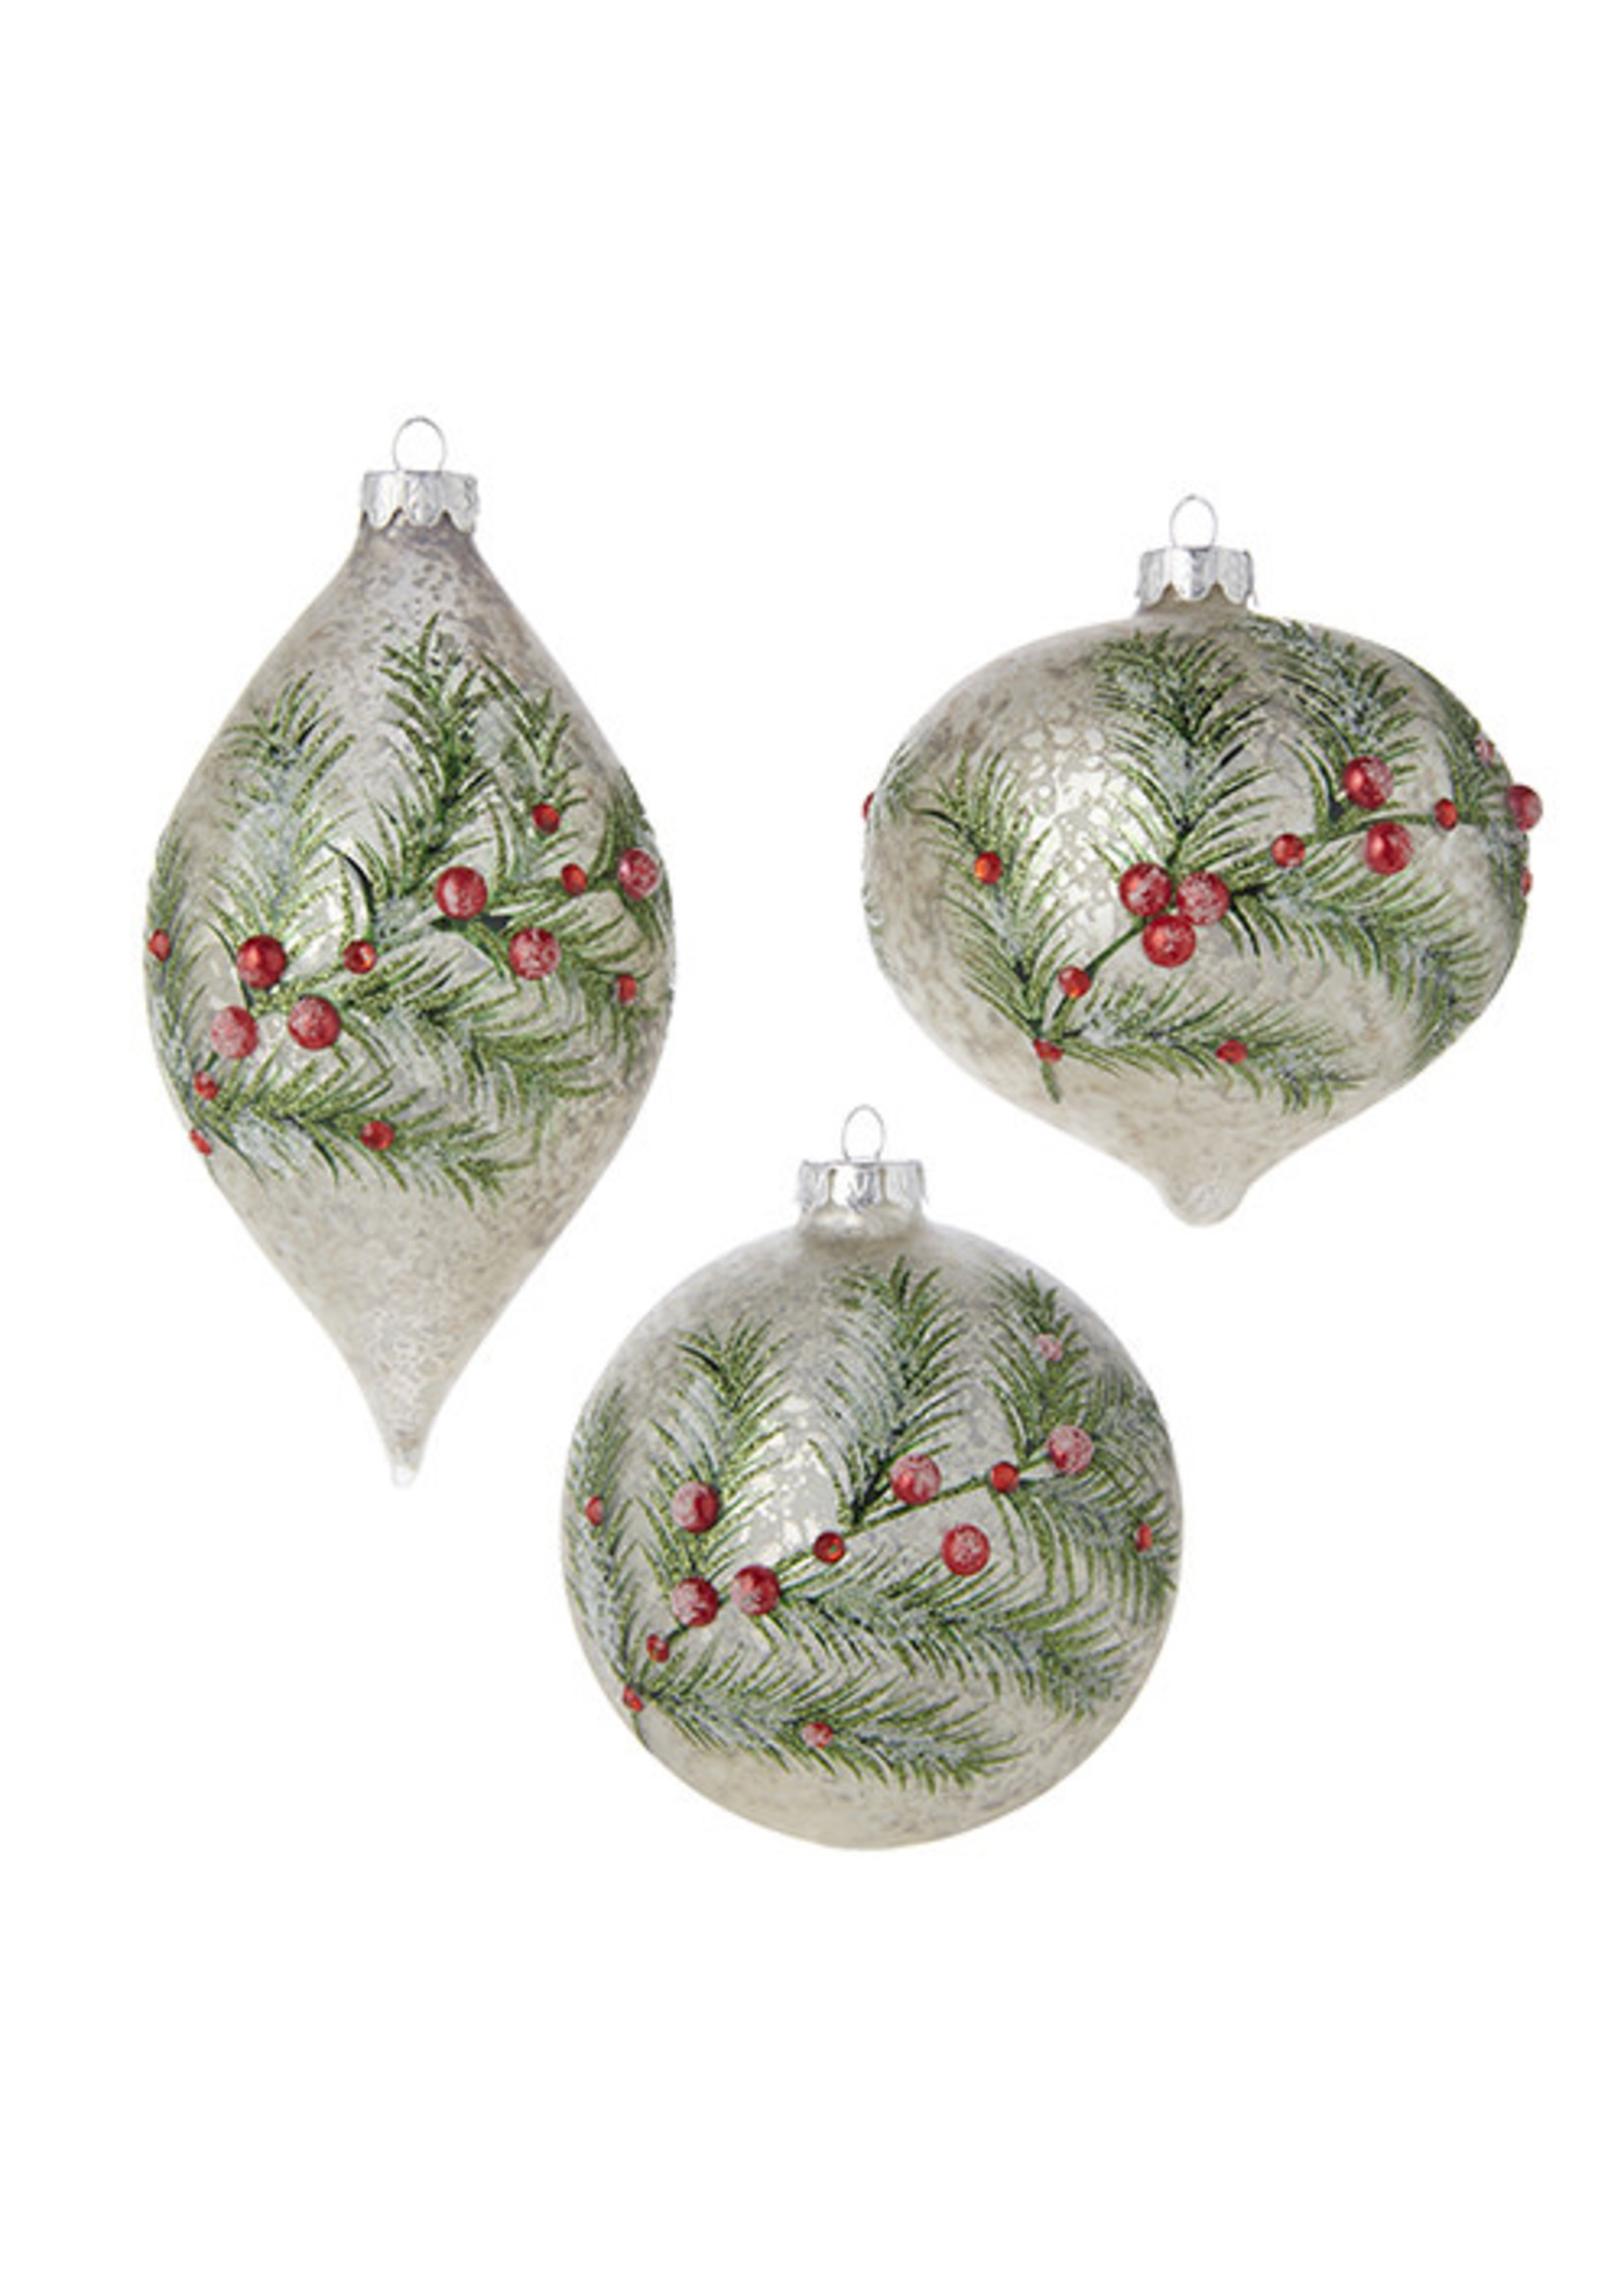 Melrose 4" Pine and Berry Ornament